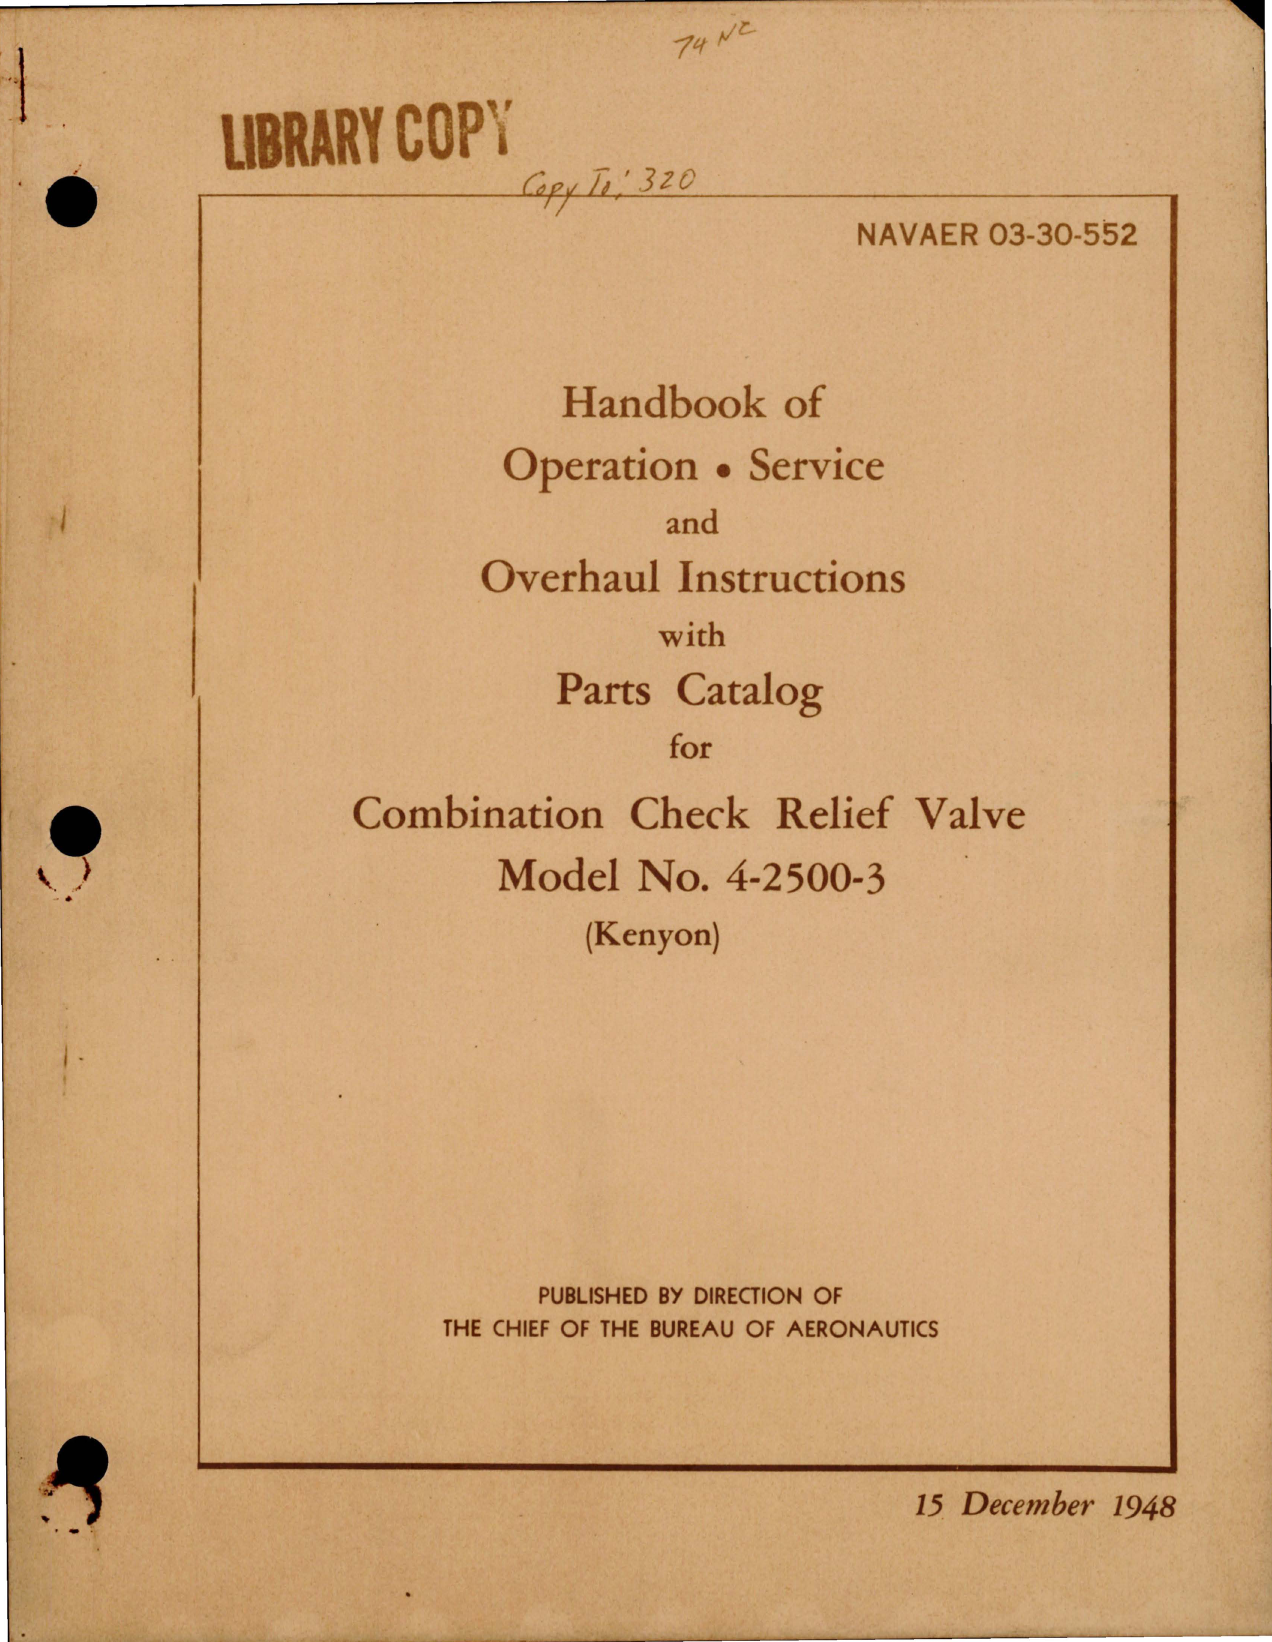 Sample page 1 from AirCorps Library document: Operation, Service and Overhaul Instructions with Parts for Combination Check Relief Valve - Model 4-2500-3 